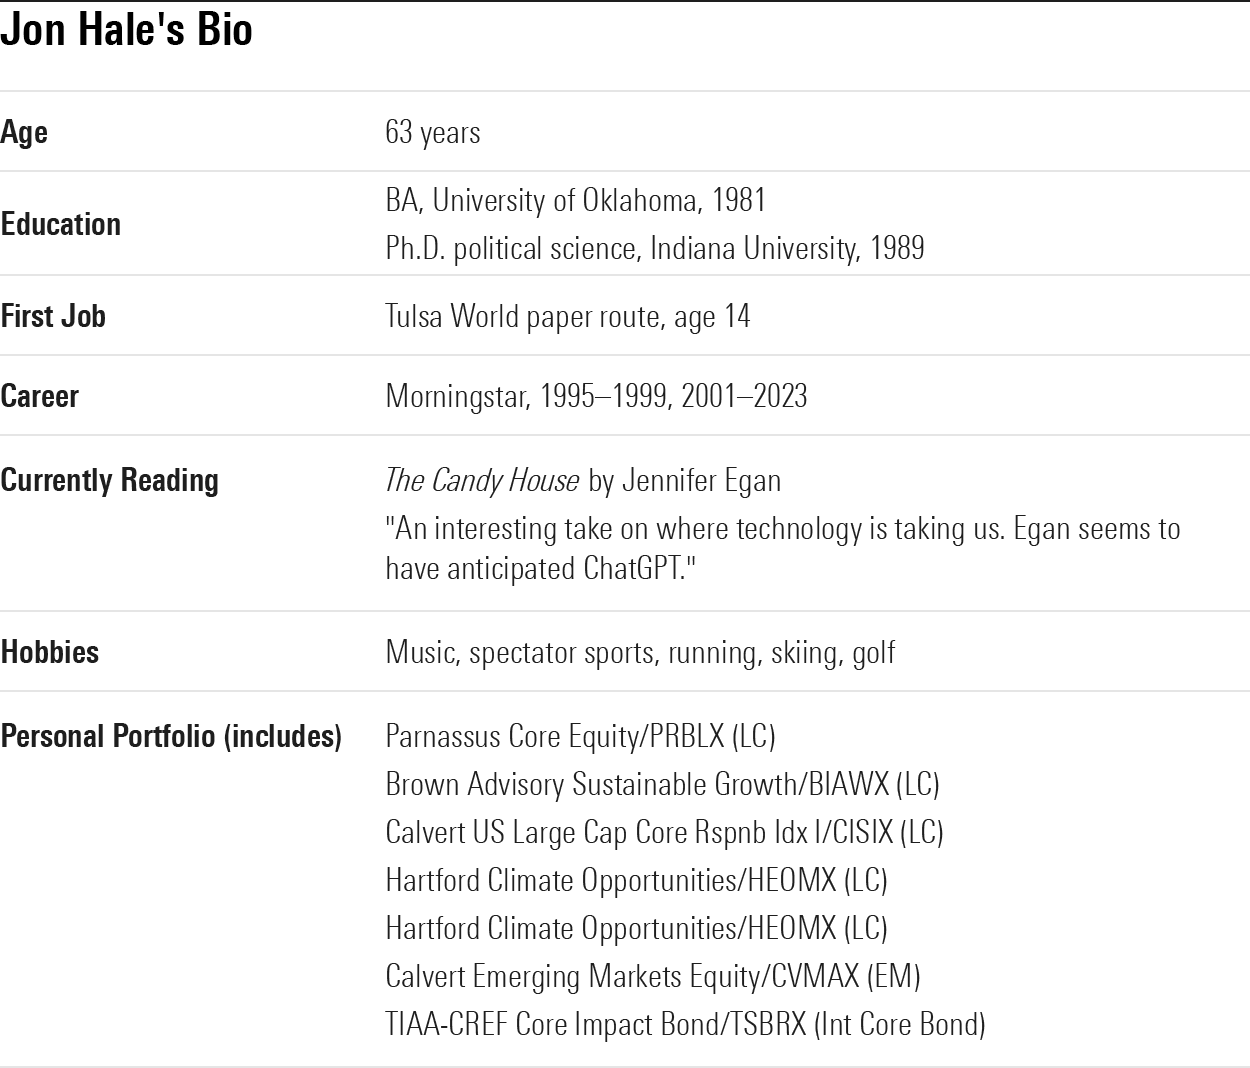 table of information about Jon Hale: age, education, first job, career, currently reading, hobbies, and some of his personal portfolio.